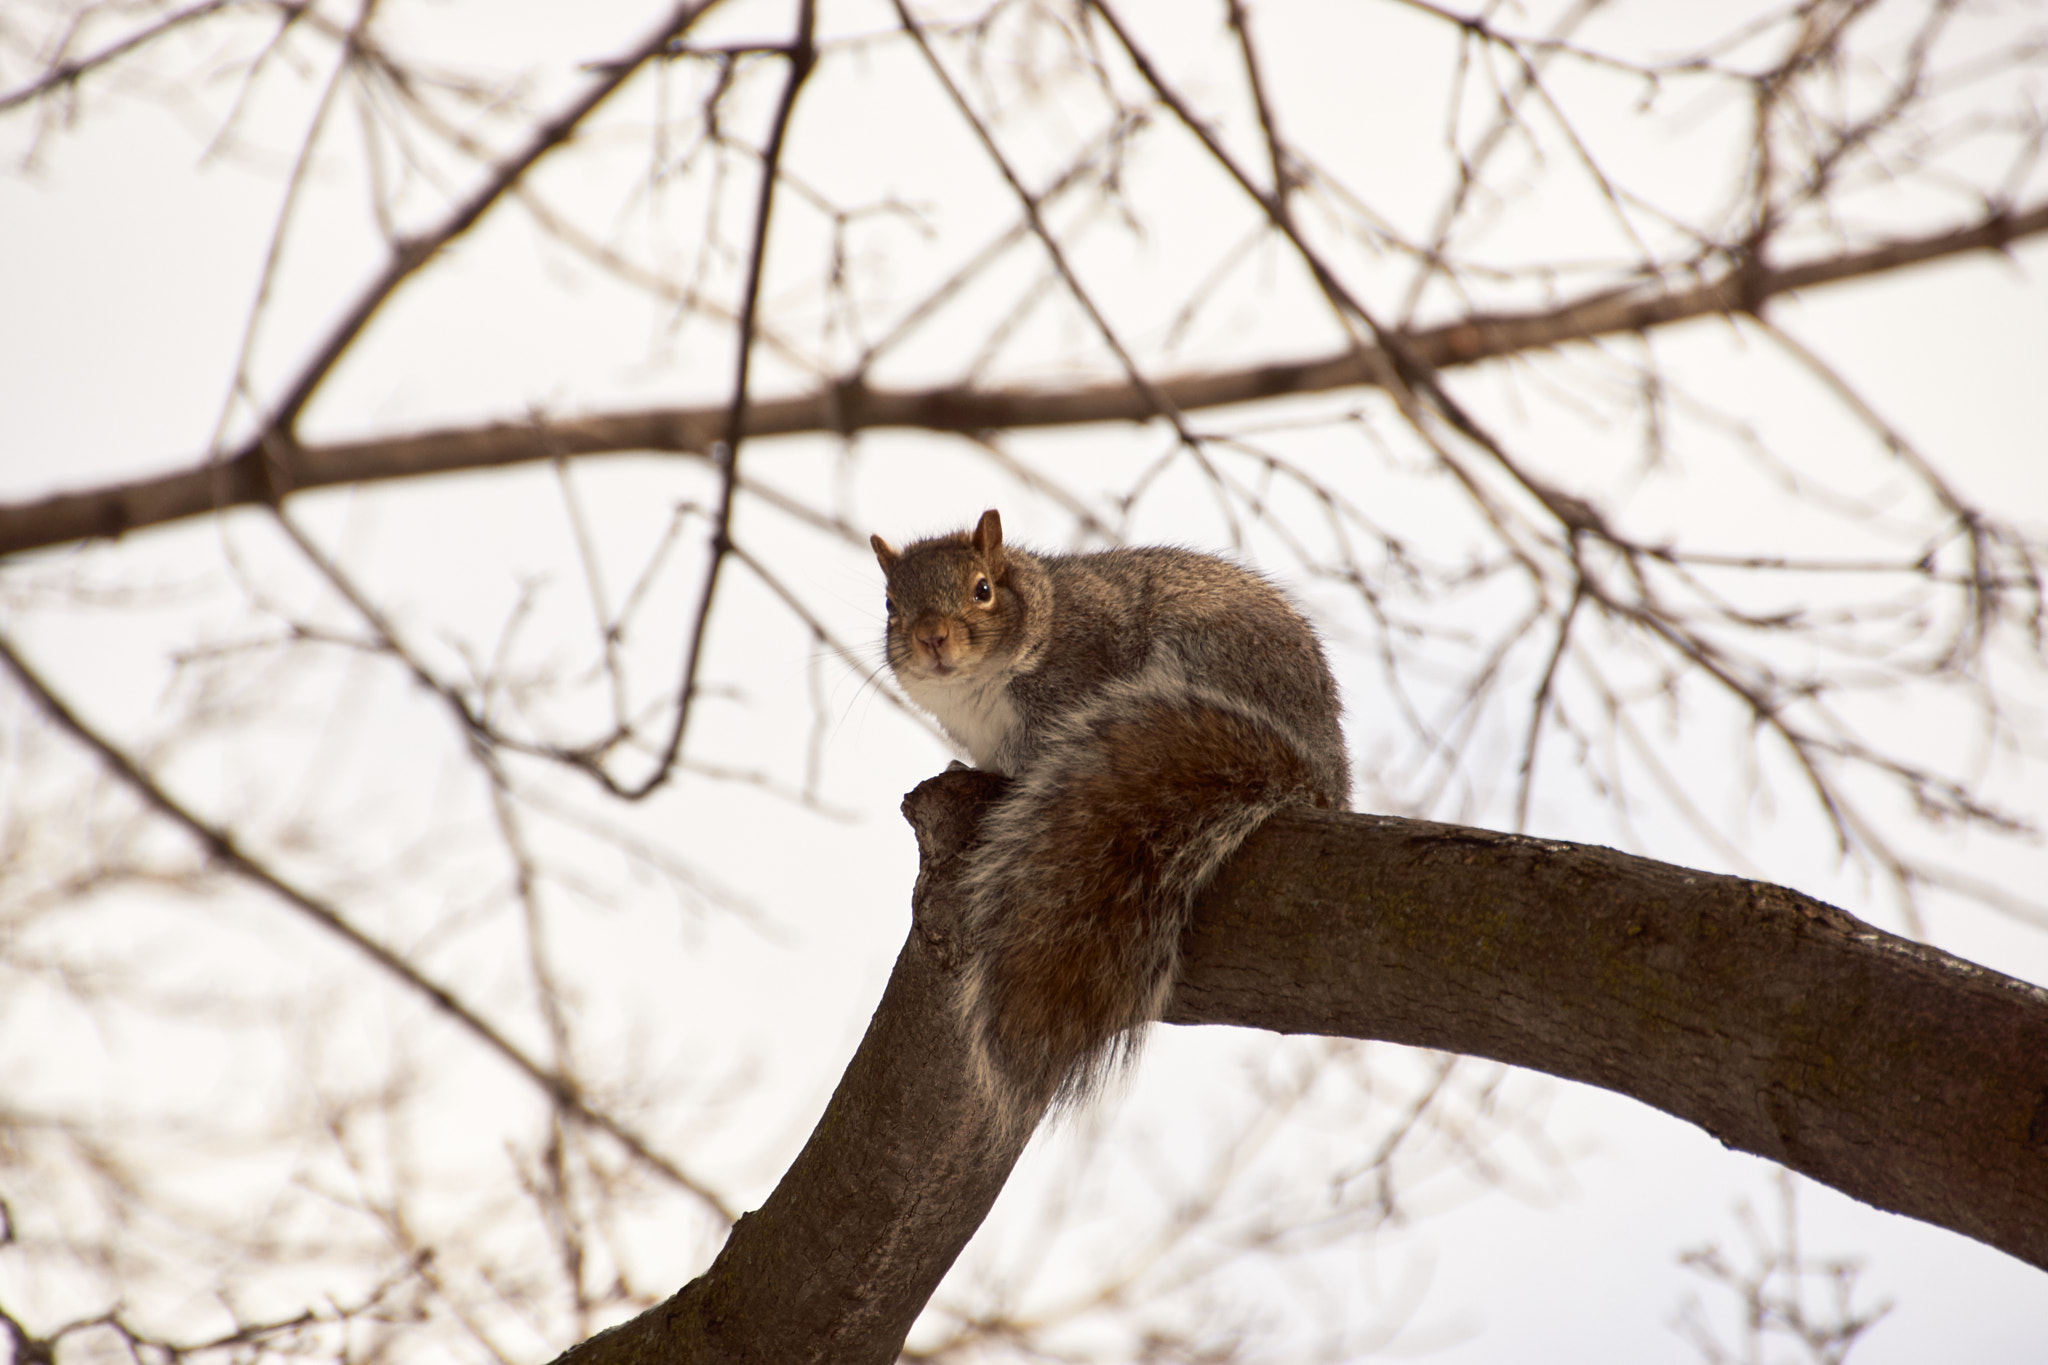 Sony SLT-A65 (SLT-A65V) sample photo. Squirrel in the air photography